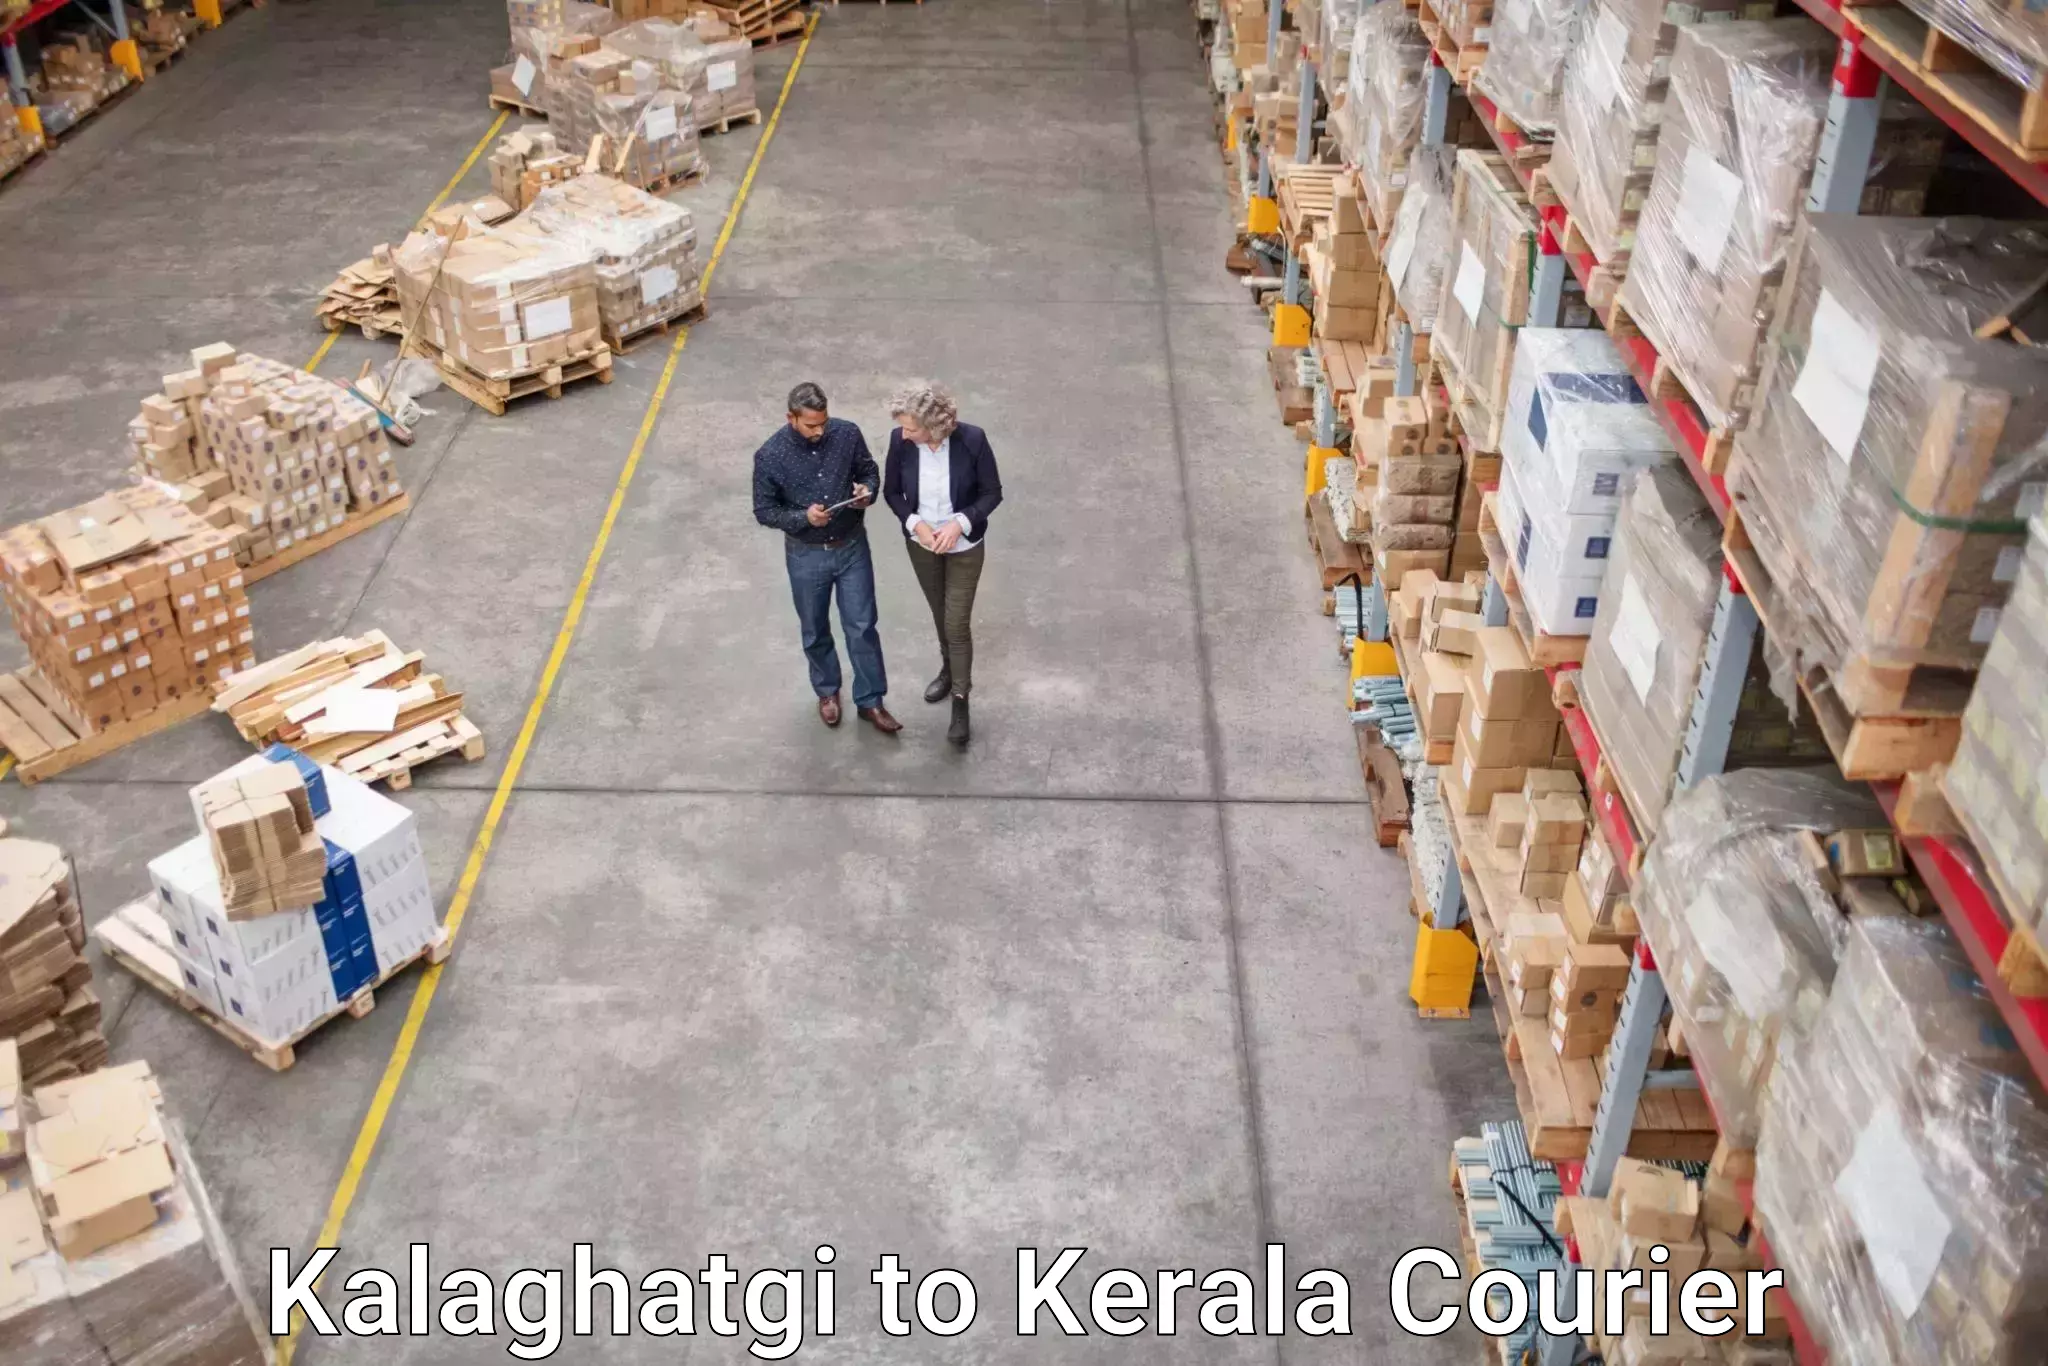 Reliable courier service Kalaghatgi to Cochin University of Science and Technology